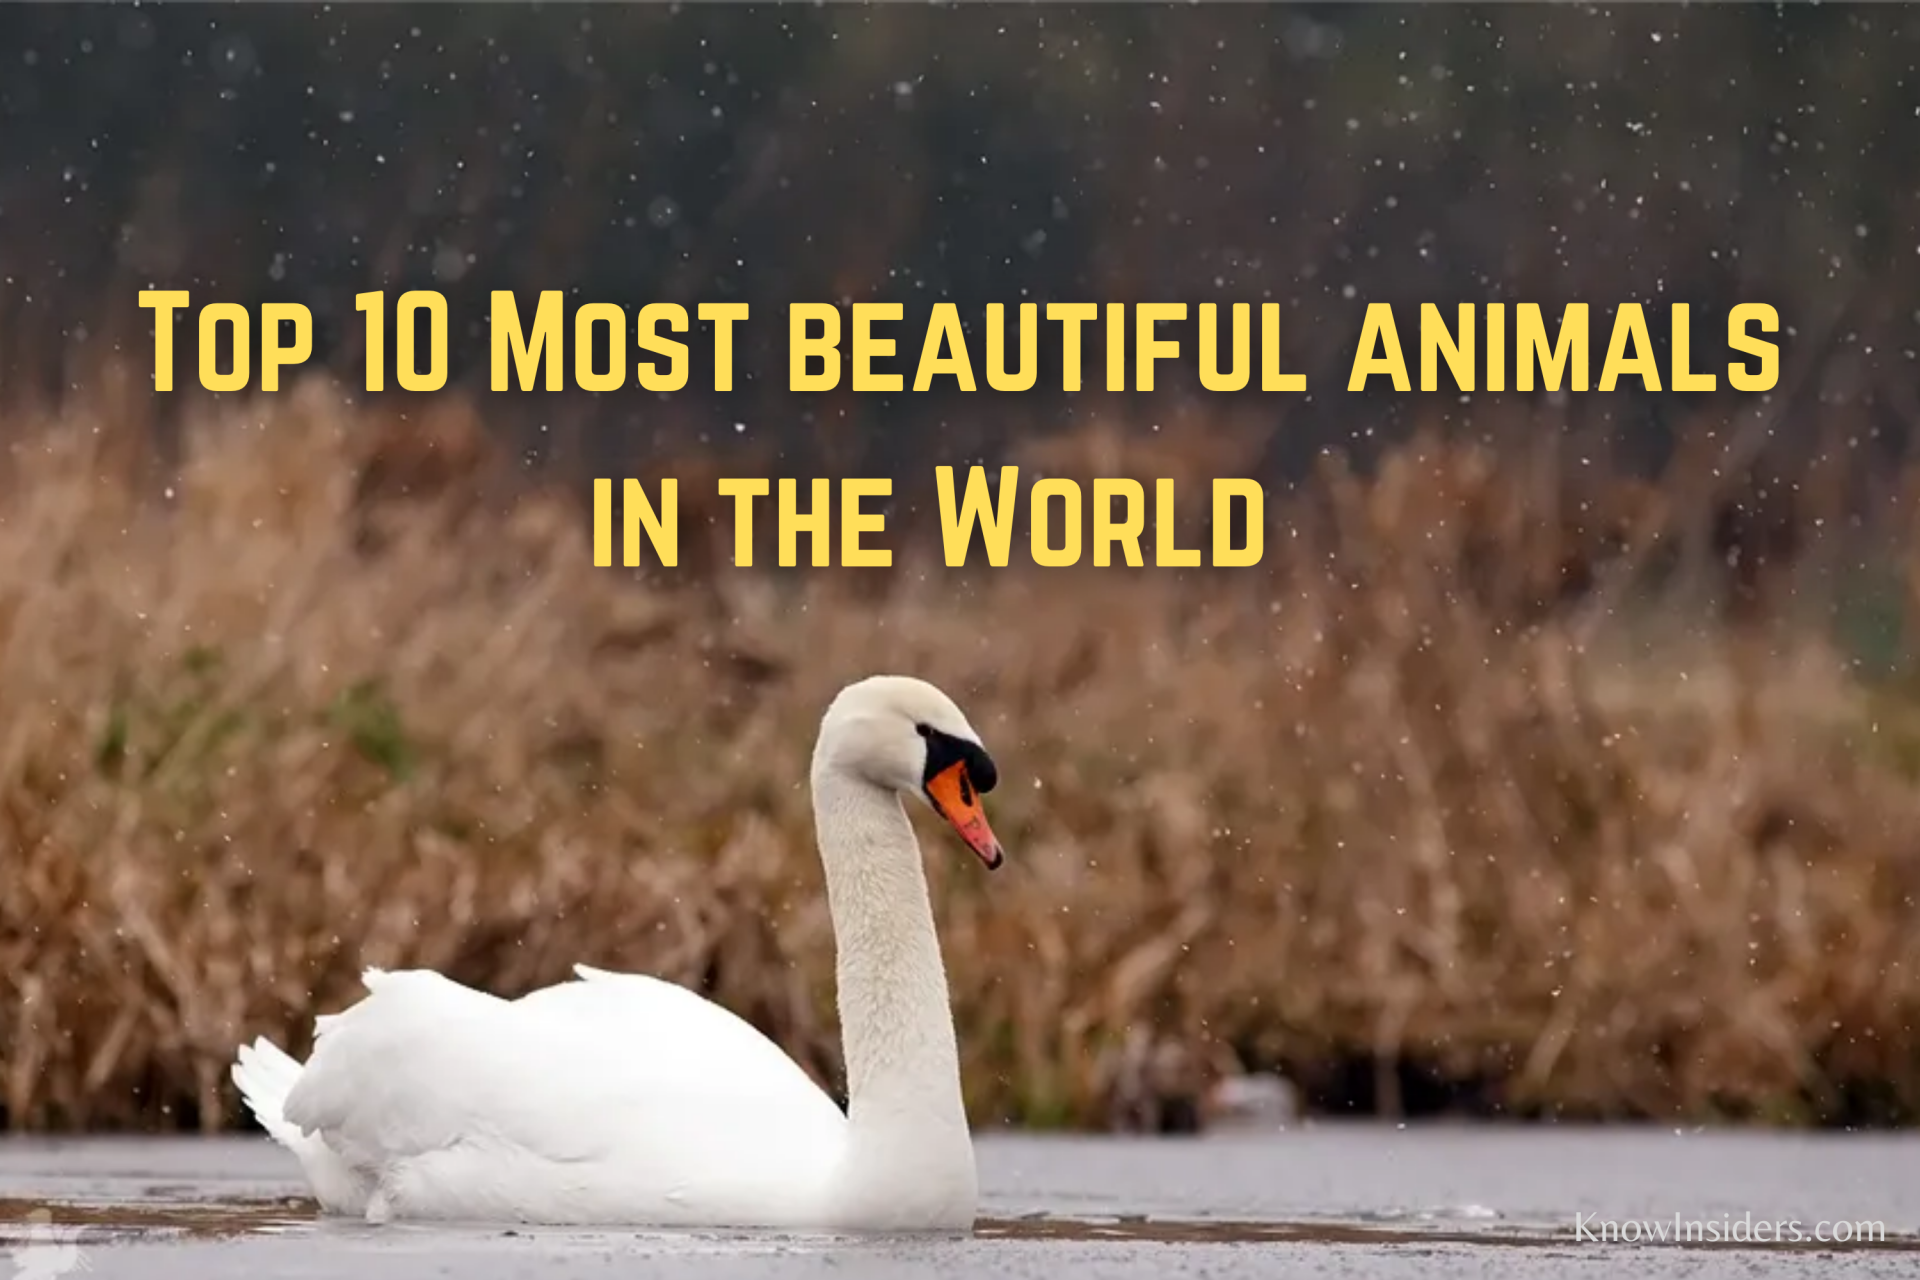 Top 10 Most Beautiful Animals in the World